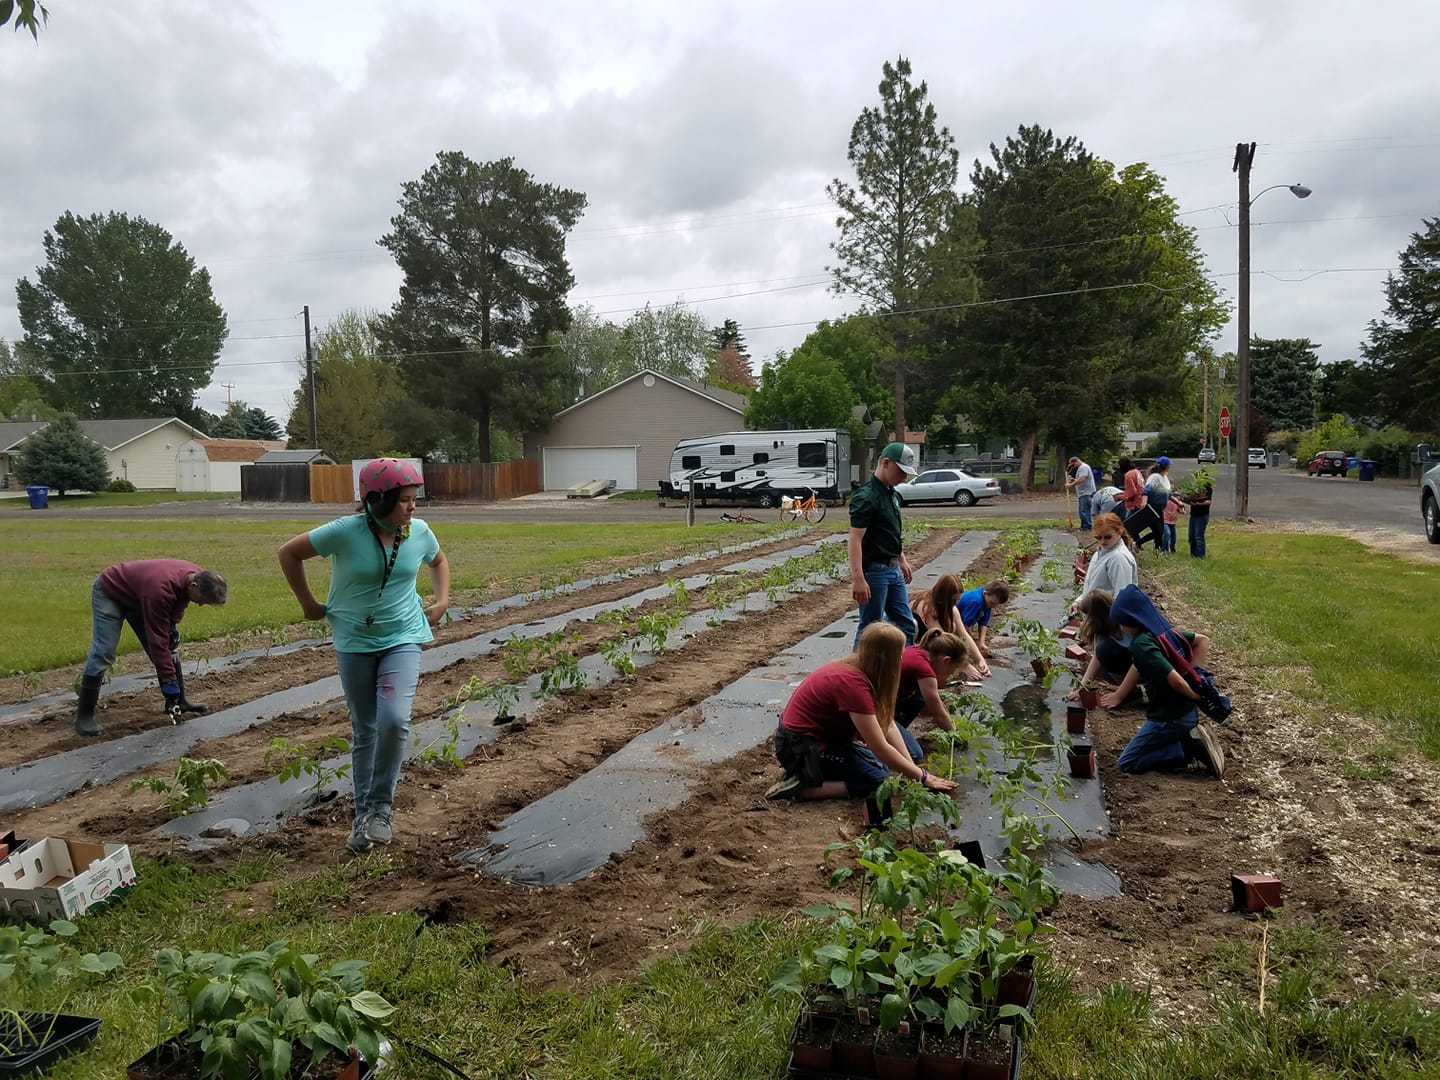 Students planting seeds as part of a program aimed to teach horticulture and its applications.